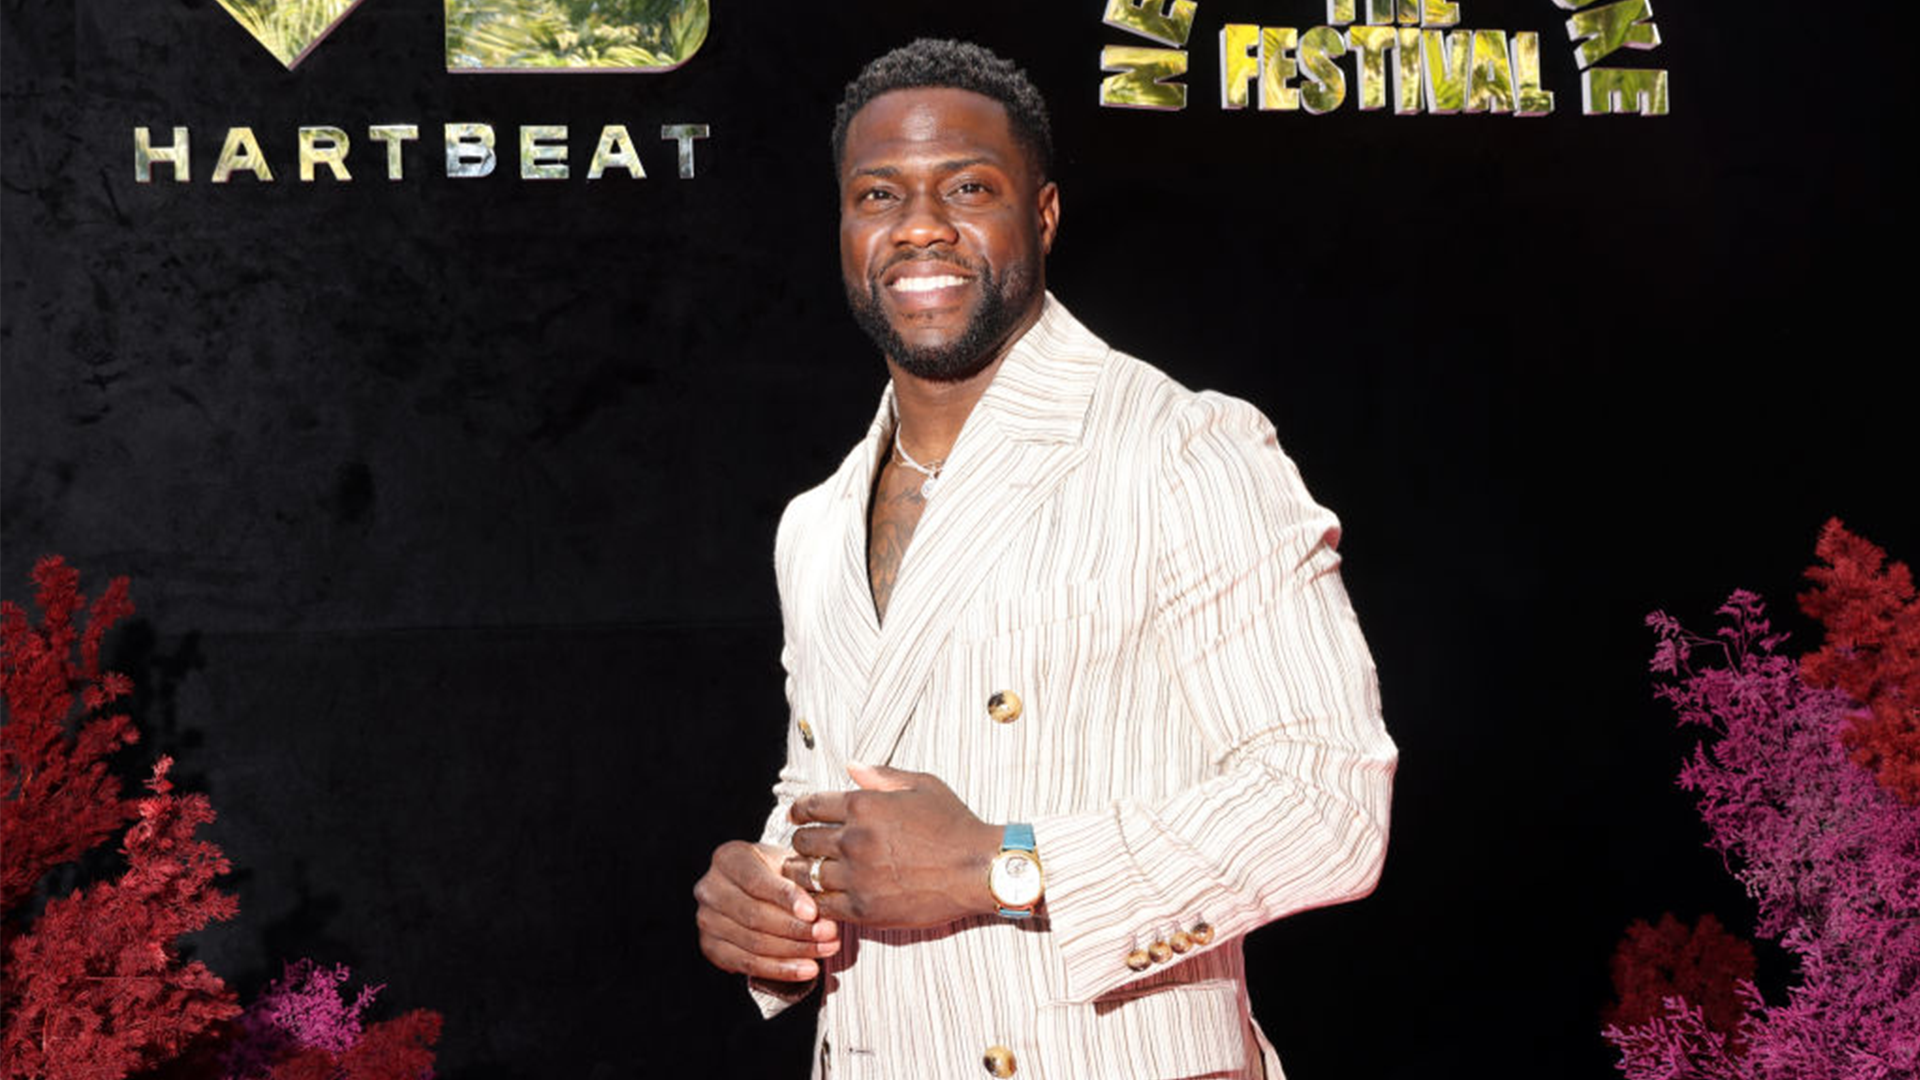 Kevin Hart Set To Open An 'Industry-Changing' Plant-Based Fast Food Restaurant